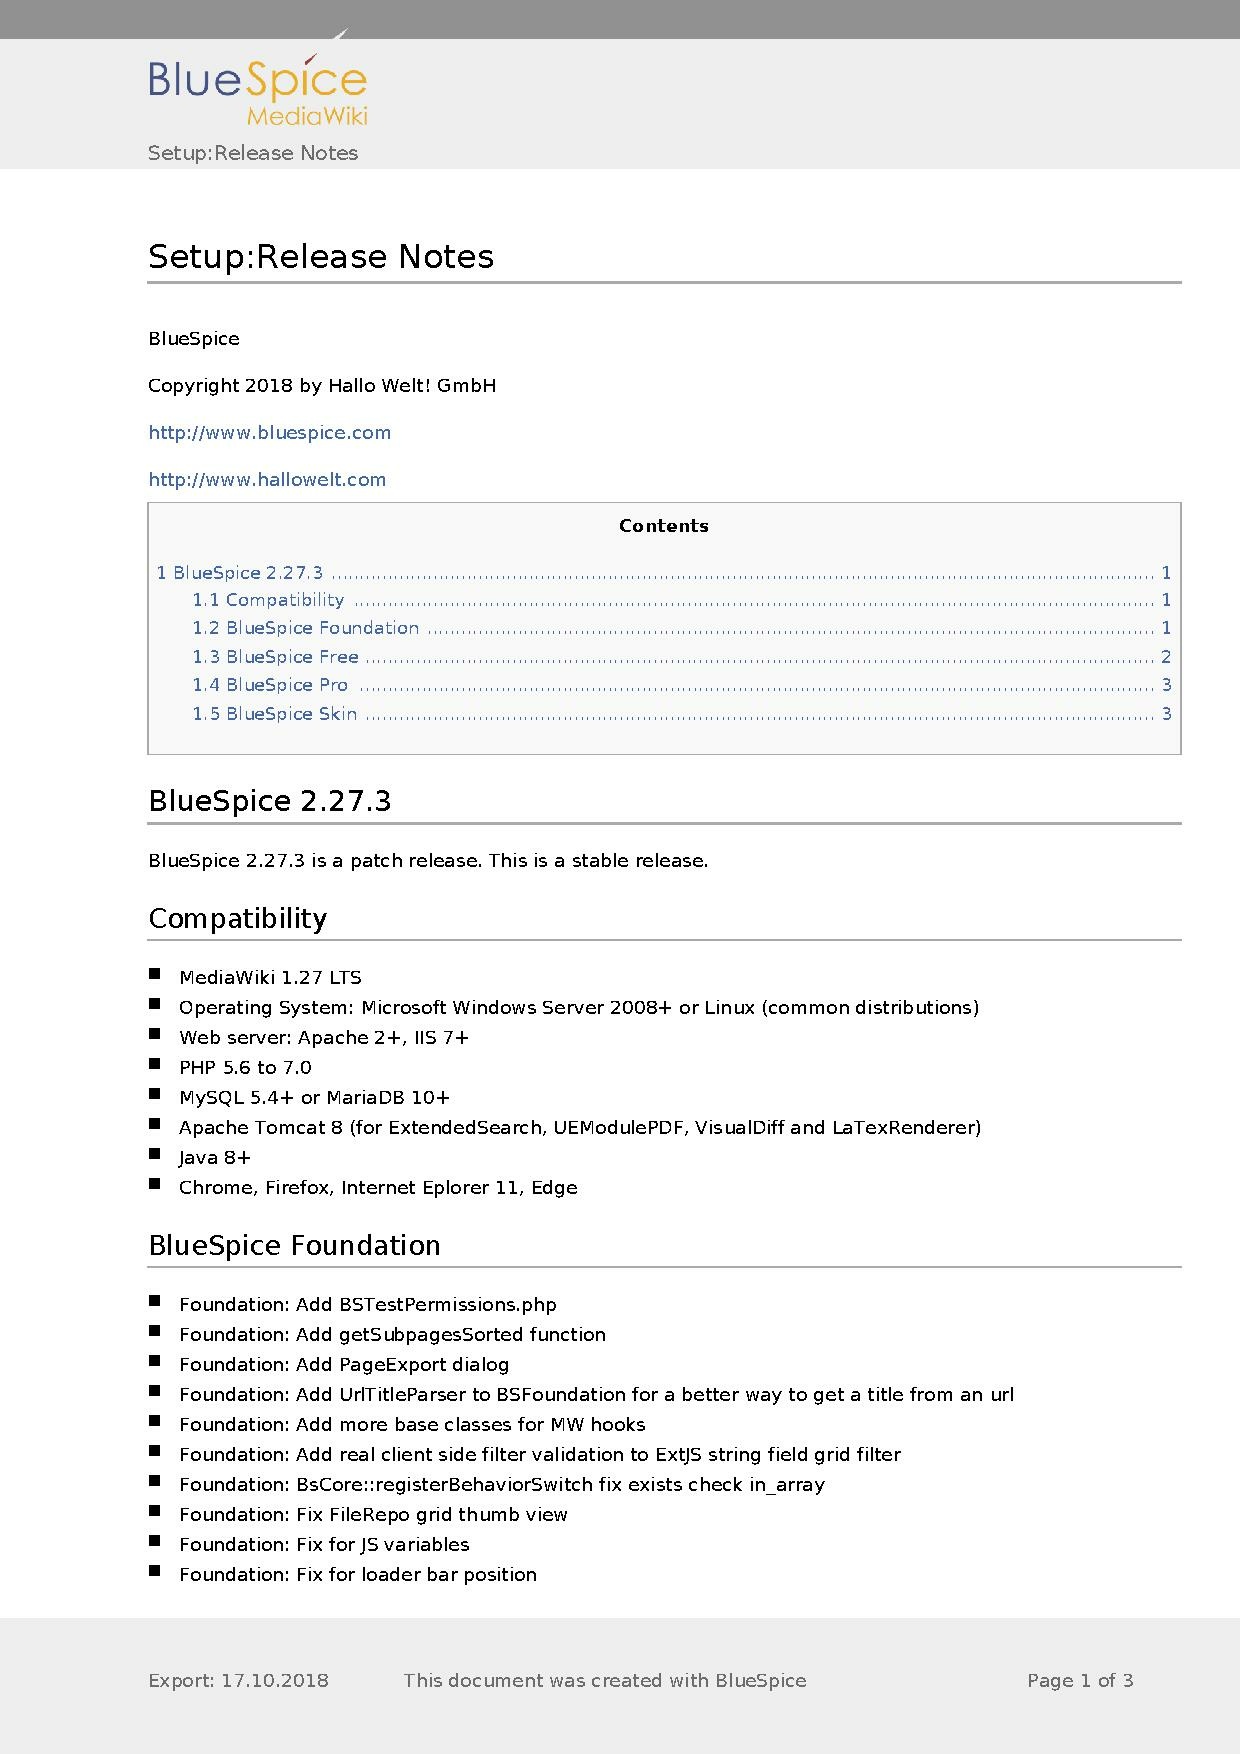 BlueSpice 2.27.3 - Release Notes.pdf